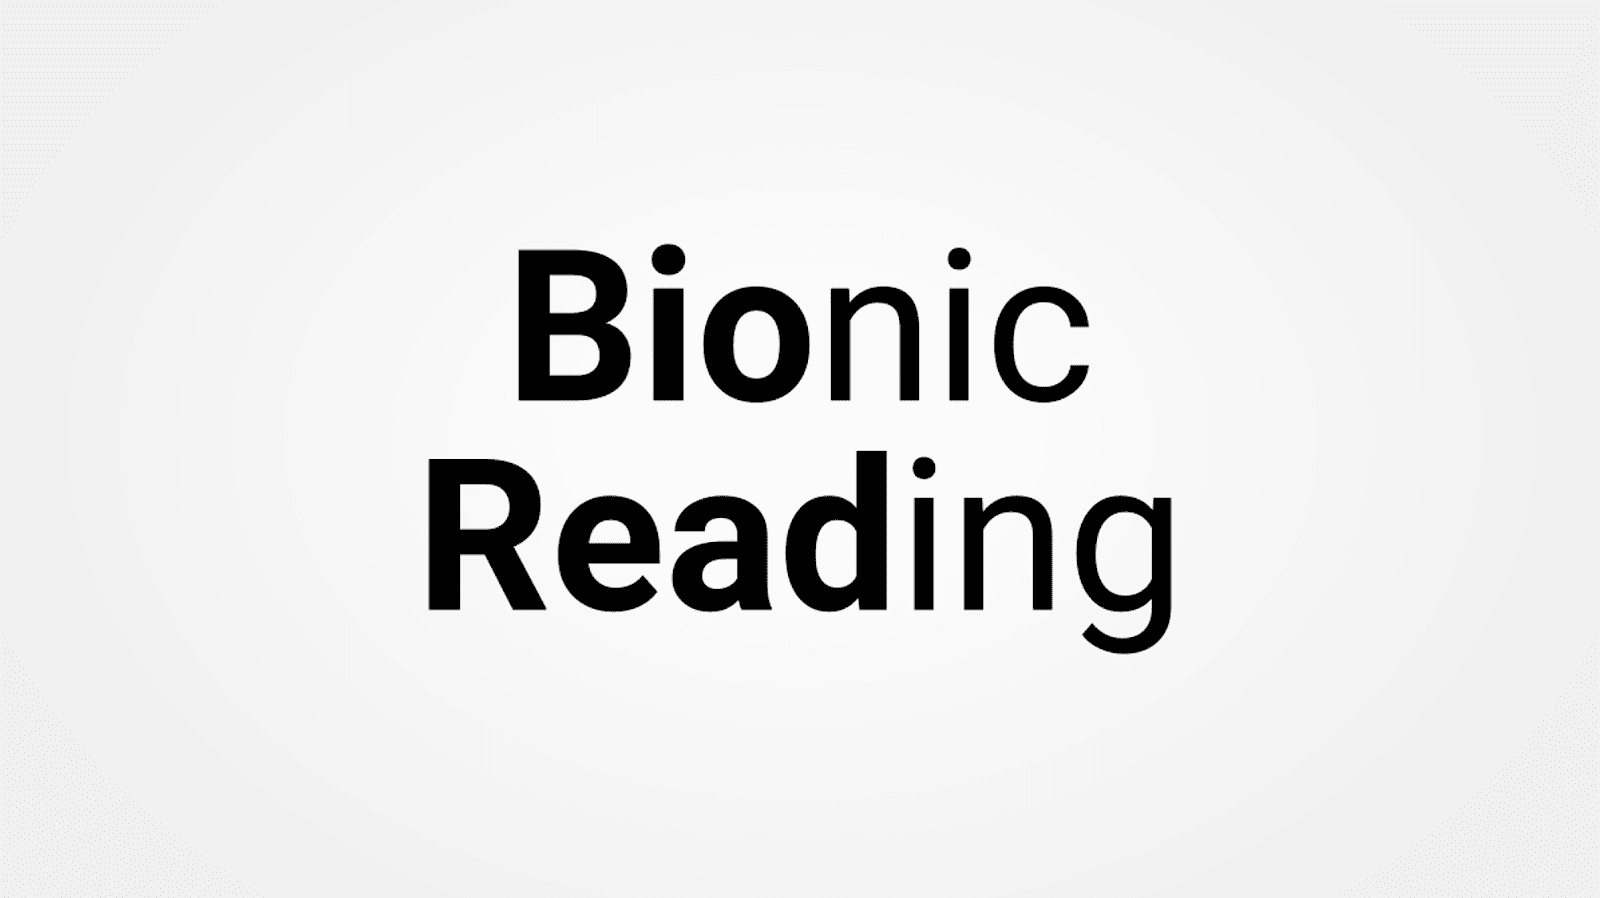 What Is Bionic Reading, and How Do You Use It?